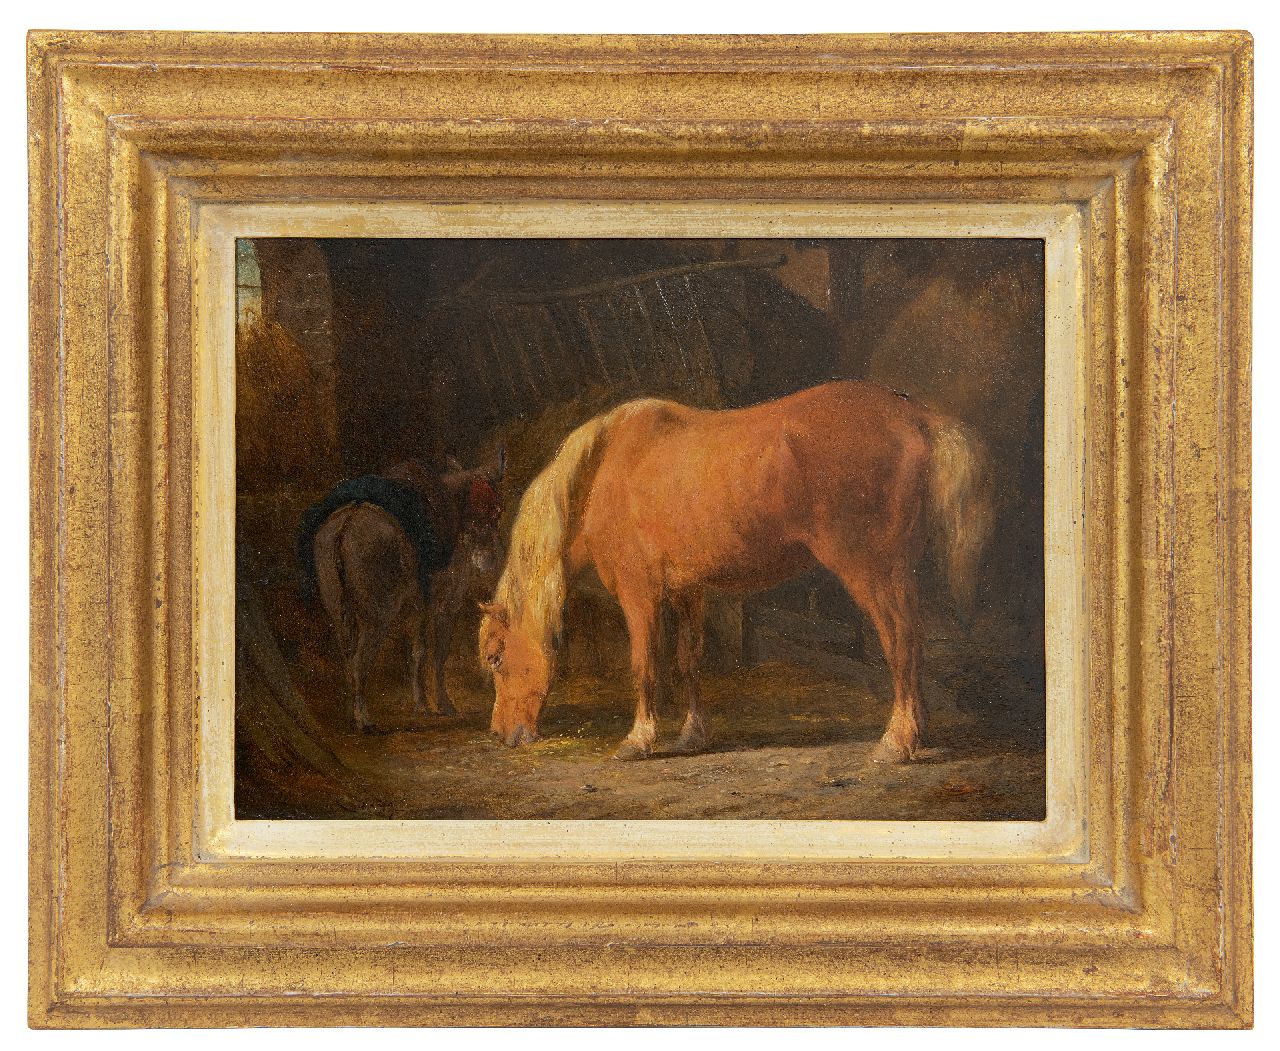 Os P.F. van | Pieter Frederik van Os | Paintings offered for sale | Horse and donkey in stable, oil on panel 16.3 x 22.4 cm, signed l.l.